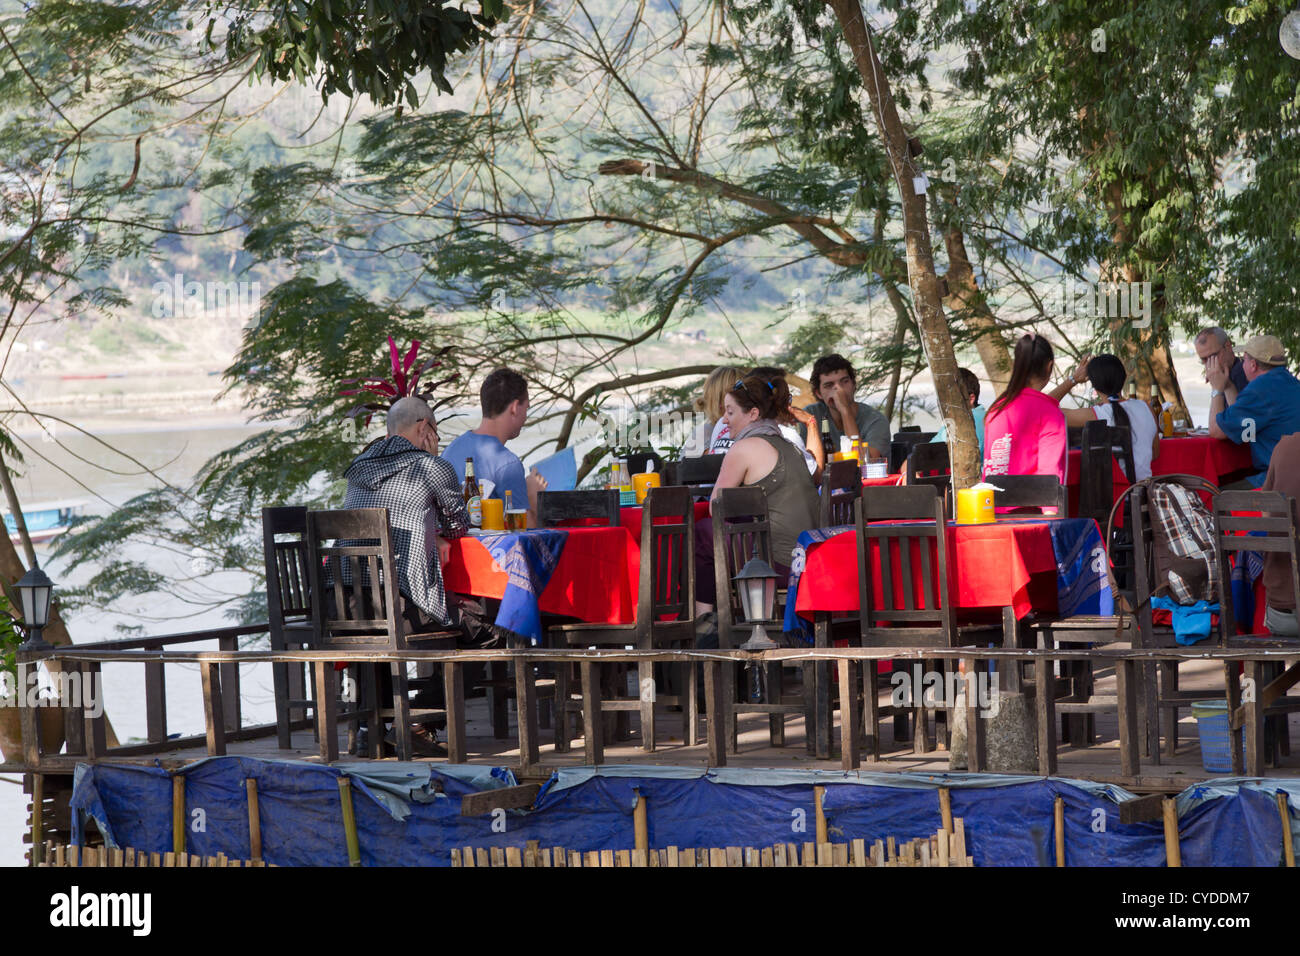 Restaurant on the Banks of the River Mekong in Luang Prabang, Laos Stock Photo